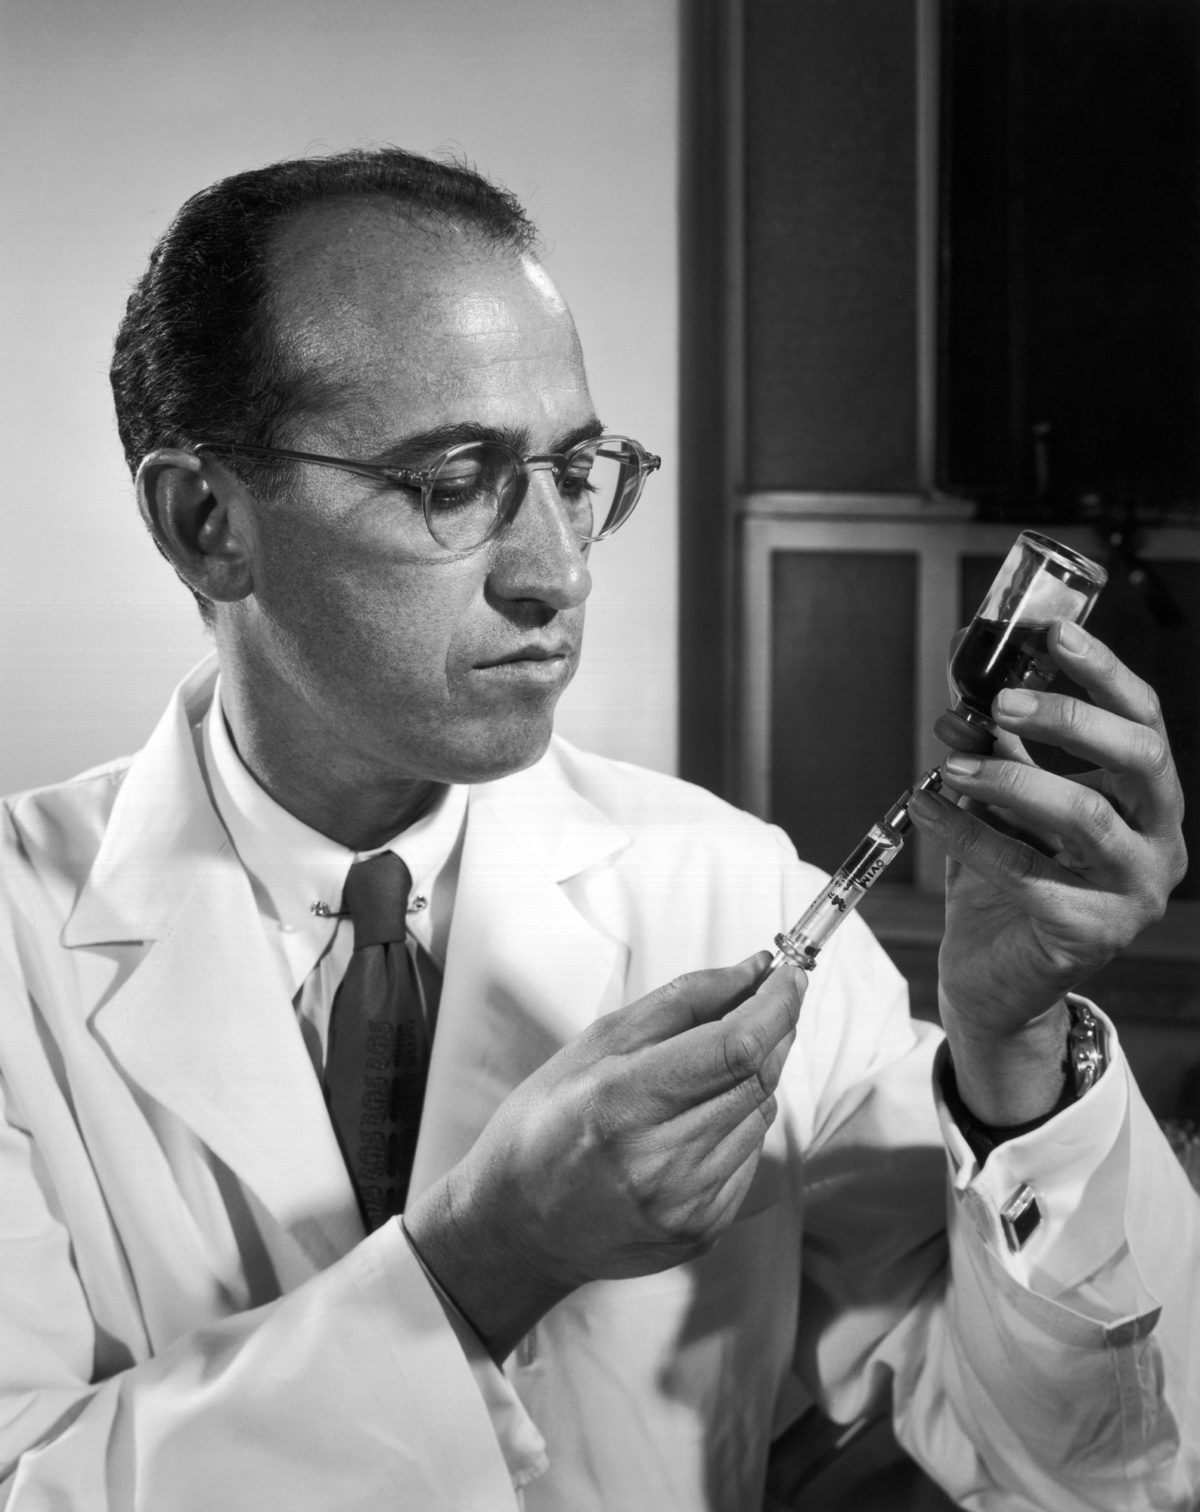 Jonas Salk + Thank You, Dr. Salk!: The Scientist Who Beat Polio and Healed the World by Dean Robbins